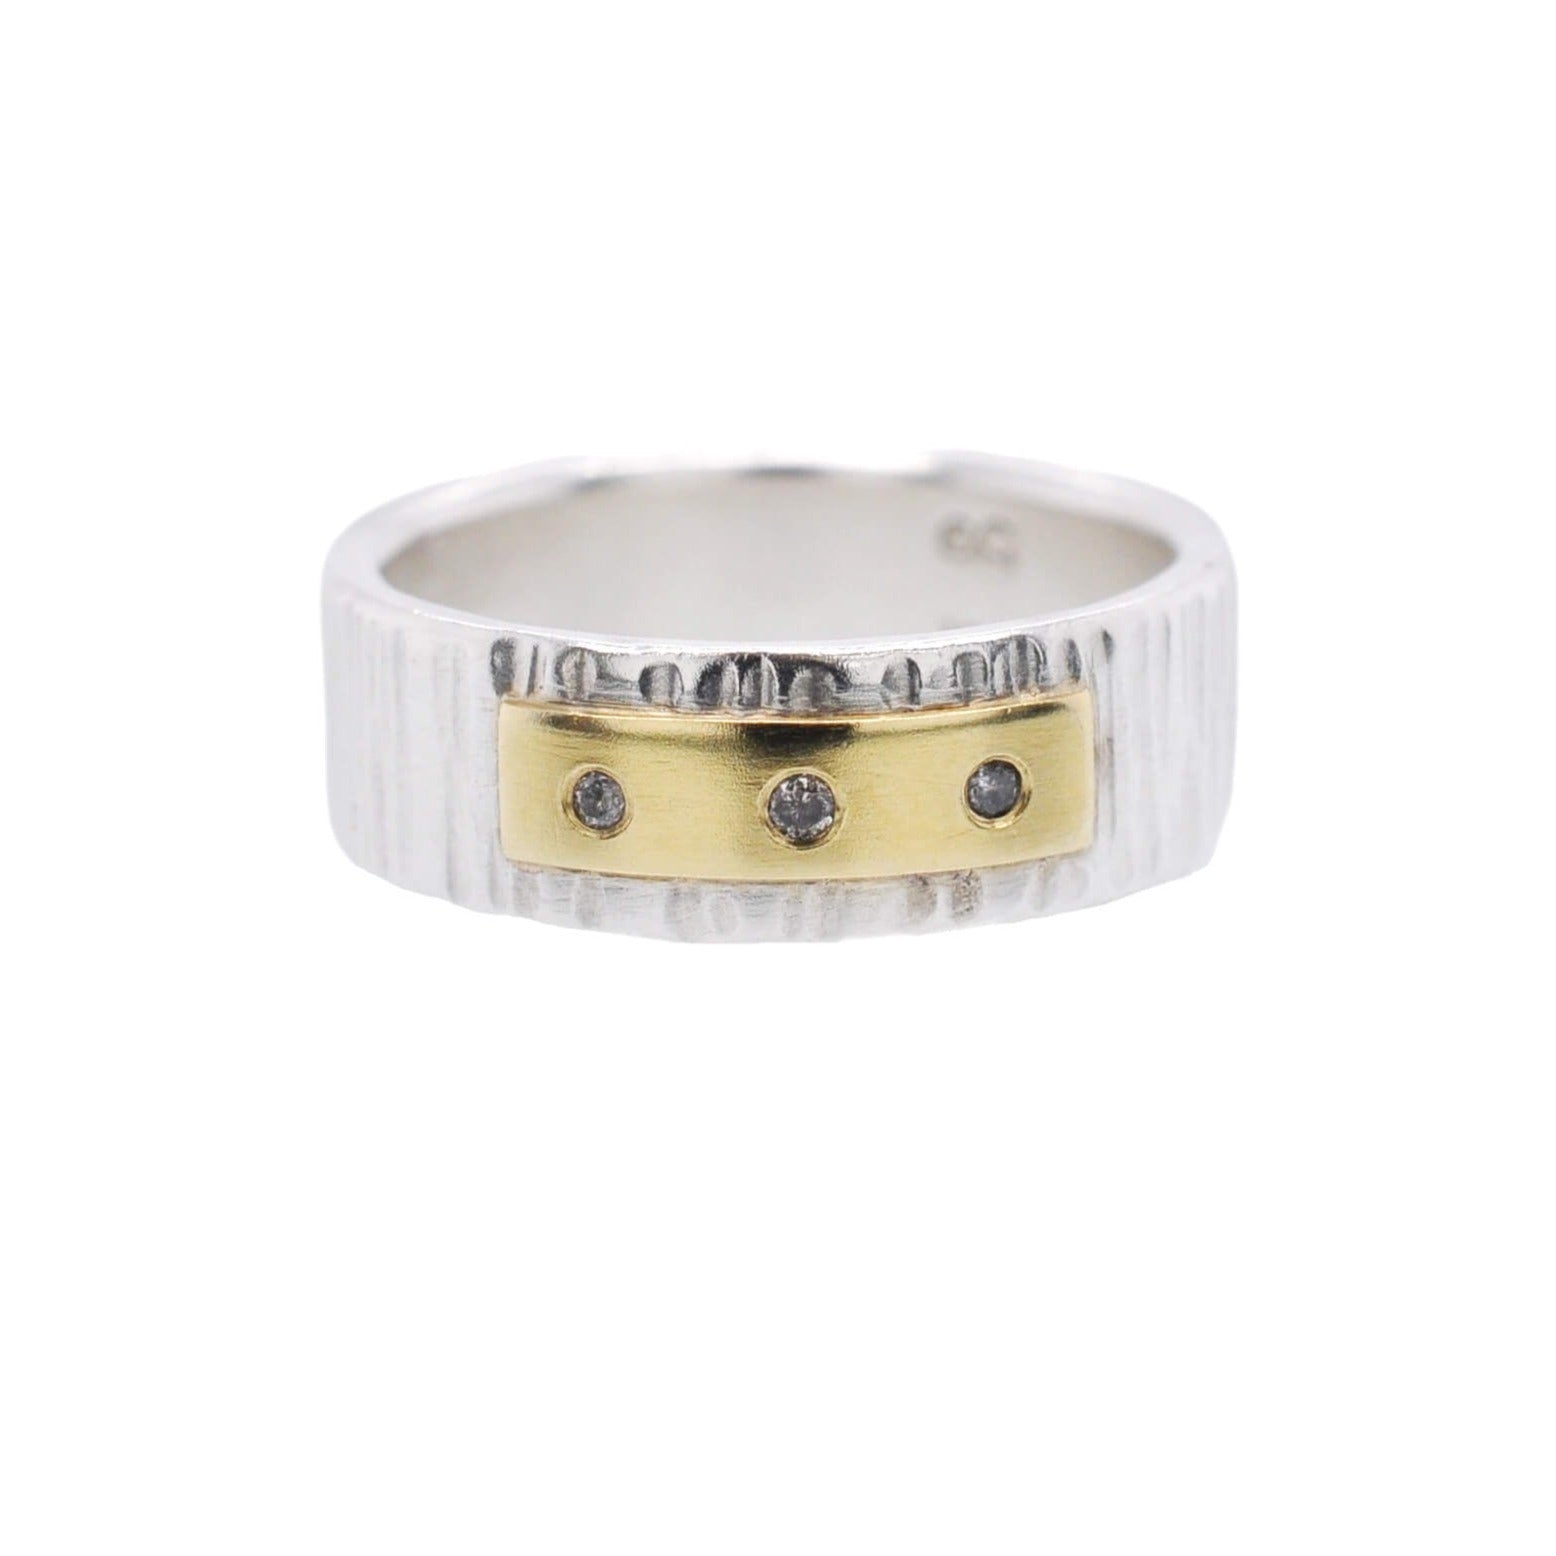 Sterling silver and yellow gold cell band with champagne diamond accent. Handmade by EC Design Jewelry in Minneapolis, MN using recycled metal and conflict-free stone.